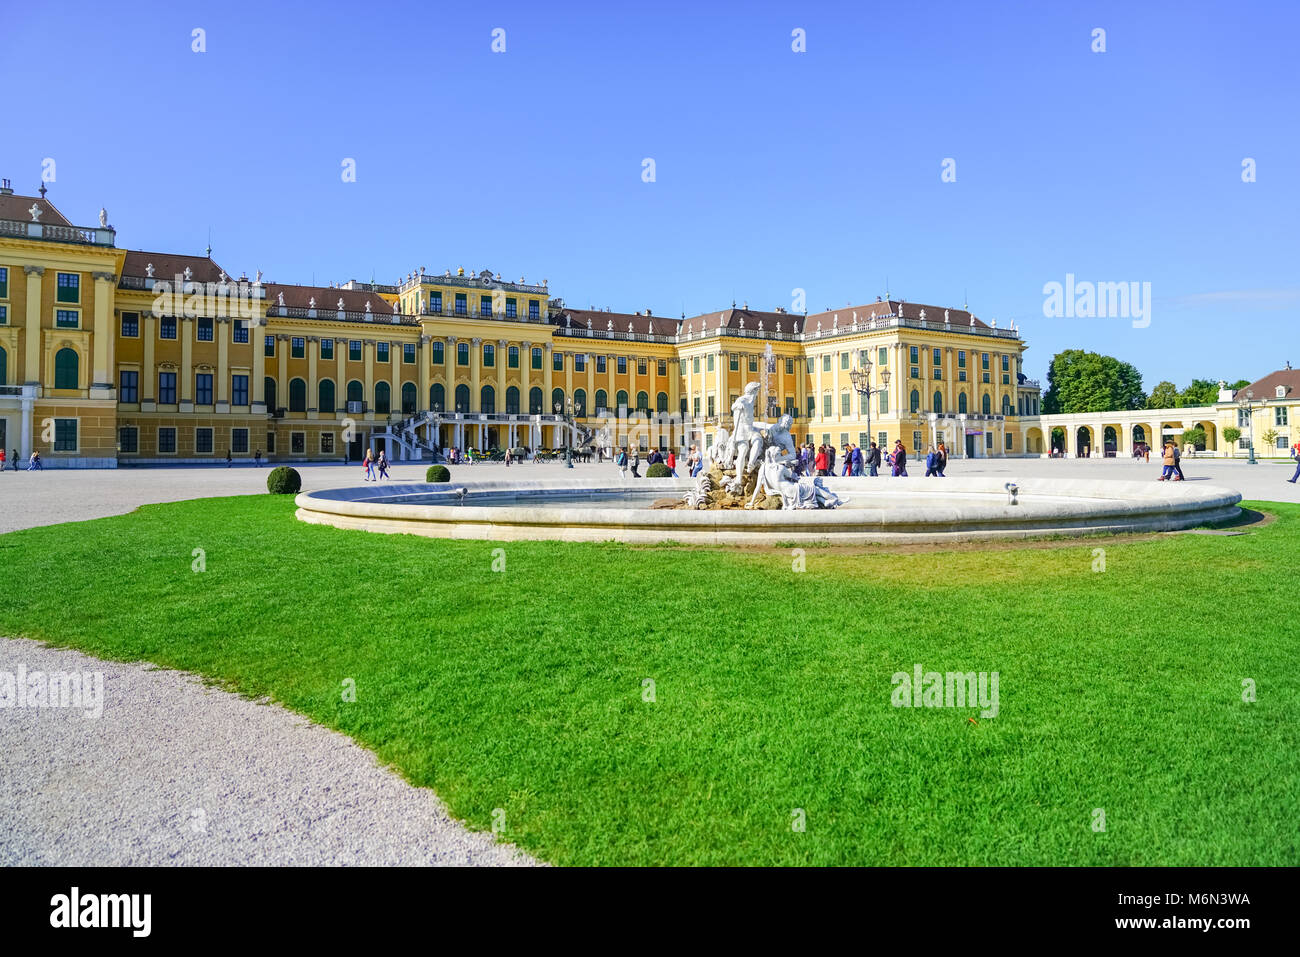 VIENNA,AUSTRIA - SEPTEMBER 4 2017; Tourists arriving ai morning walking past lawn and fountain in front baroque architectural detail of the Schonbrunn Stock Photo